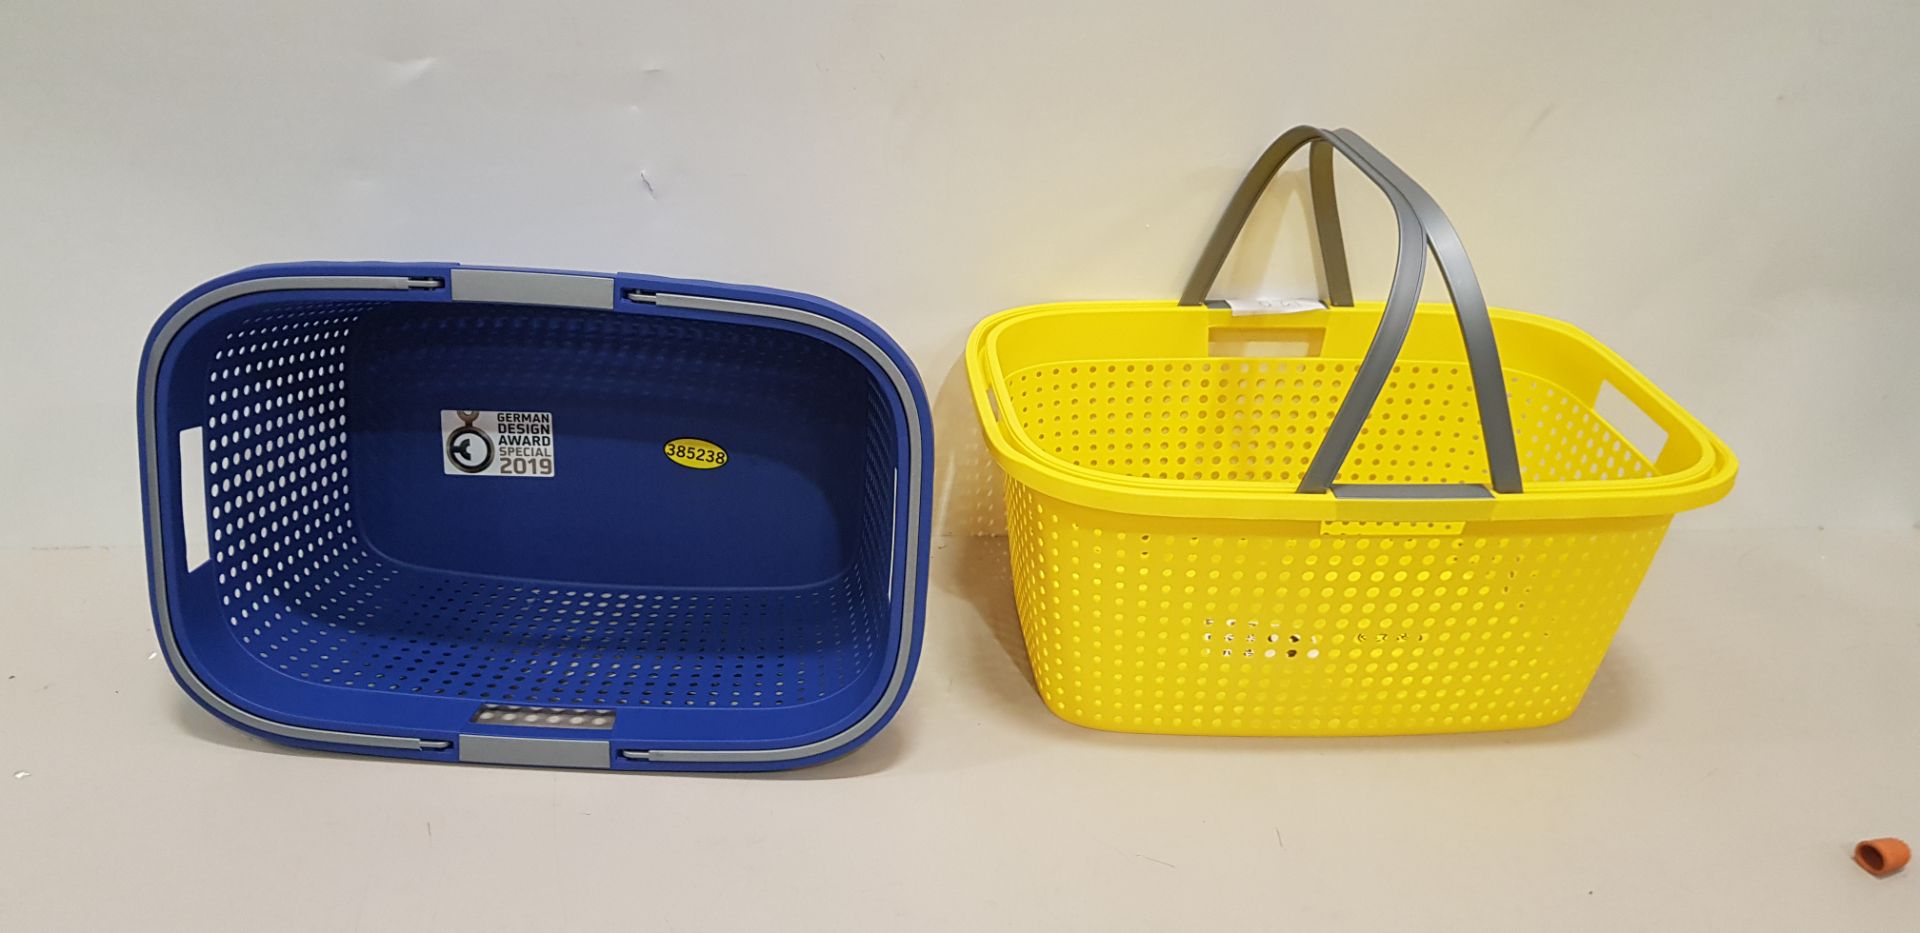 120 X BRAND NEW YELLOW AND BLUE 38 LITRE AQUAPUR LAUNDRY BASKETS WITH HANDLES